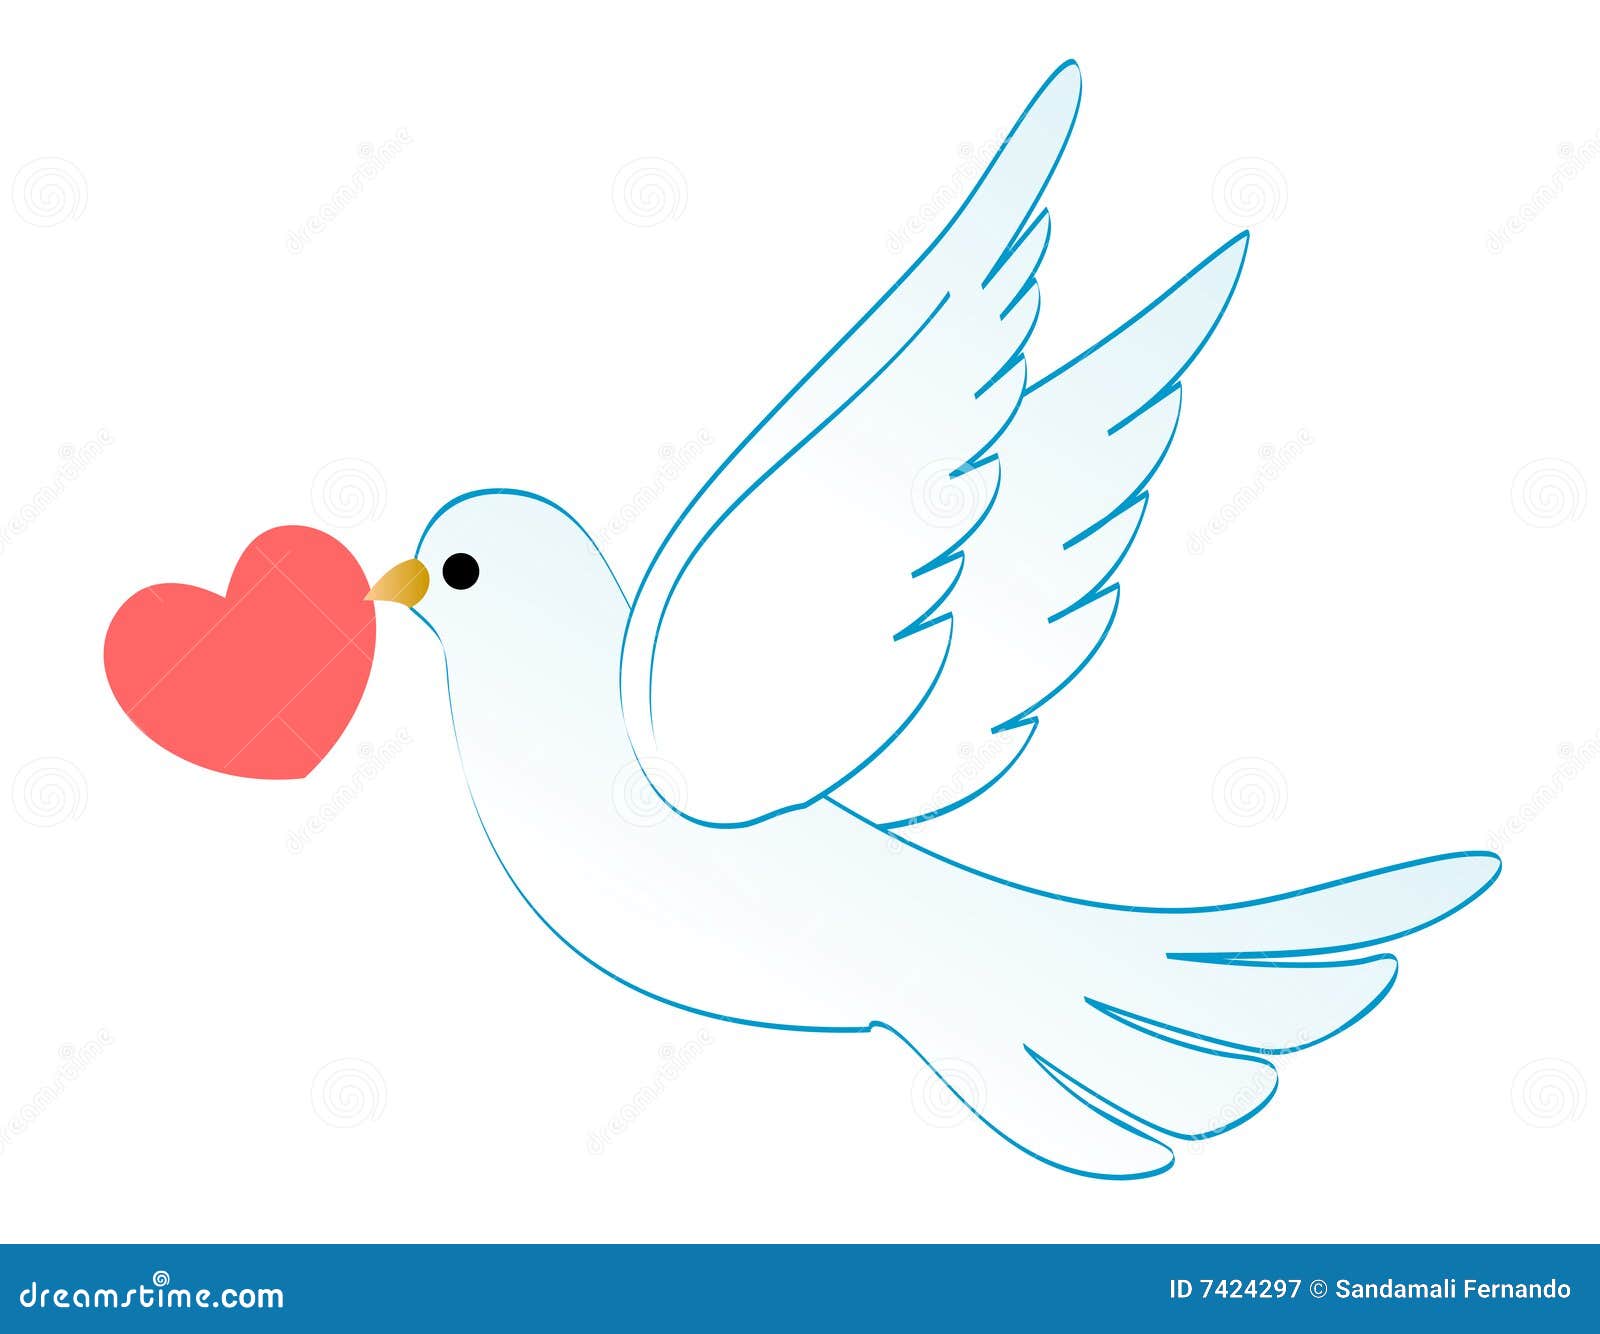 free clipart of wedding doves - photo #31